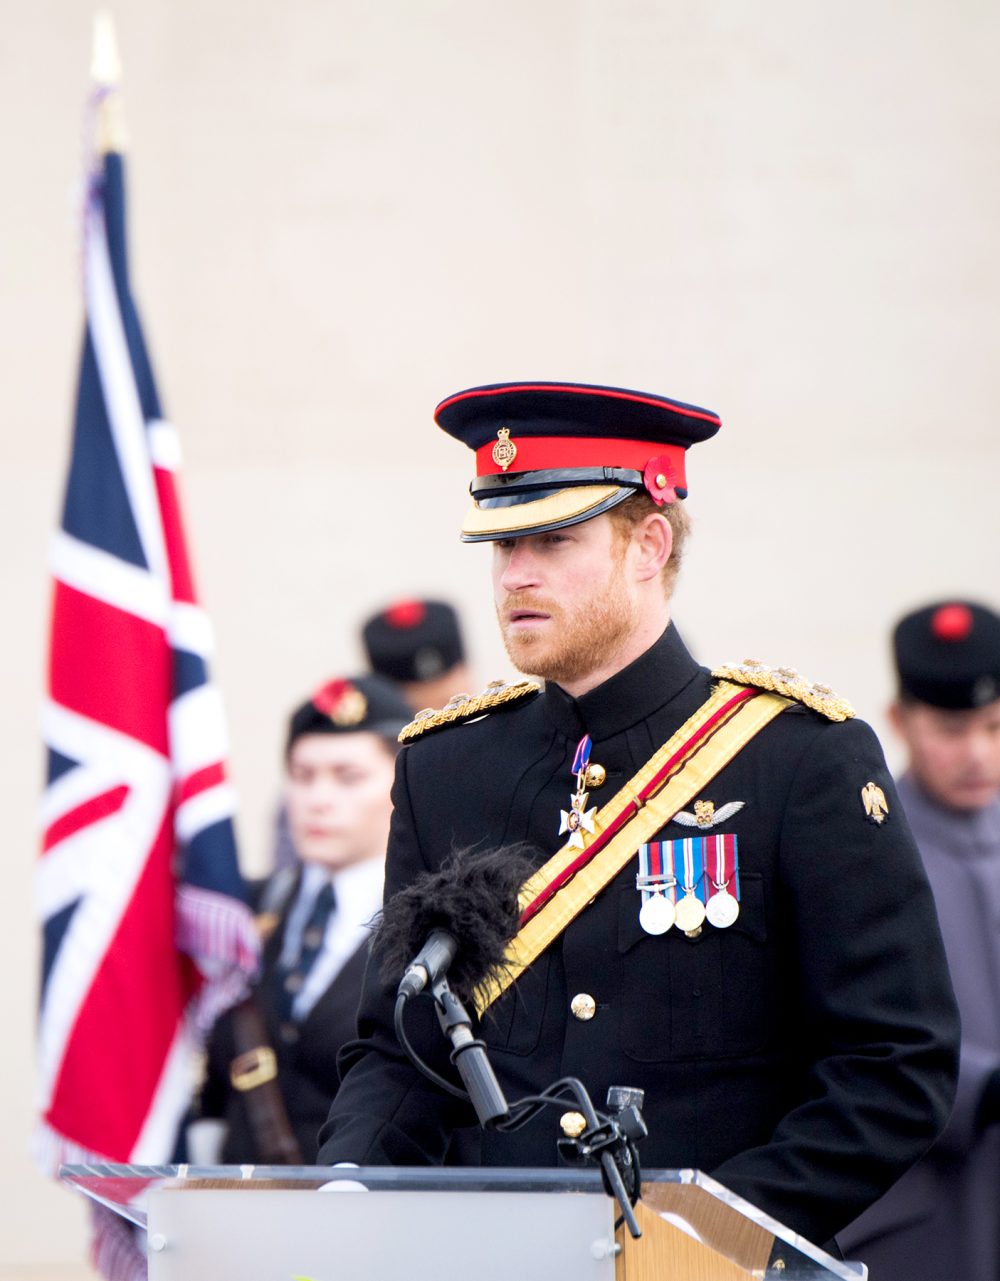 Prince Harry attends Armistice Day service at The Armed Forces Memorial at The National Memorial Arboretum on November 11, 2016 in Stafford, England.